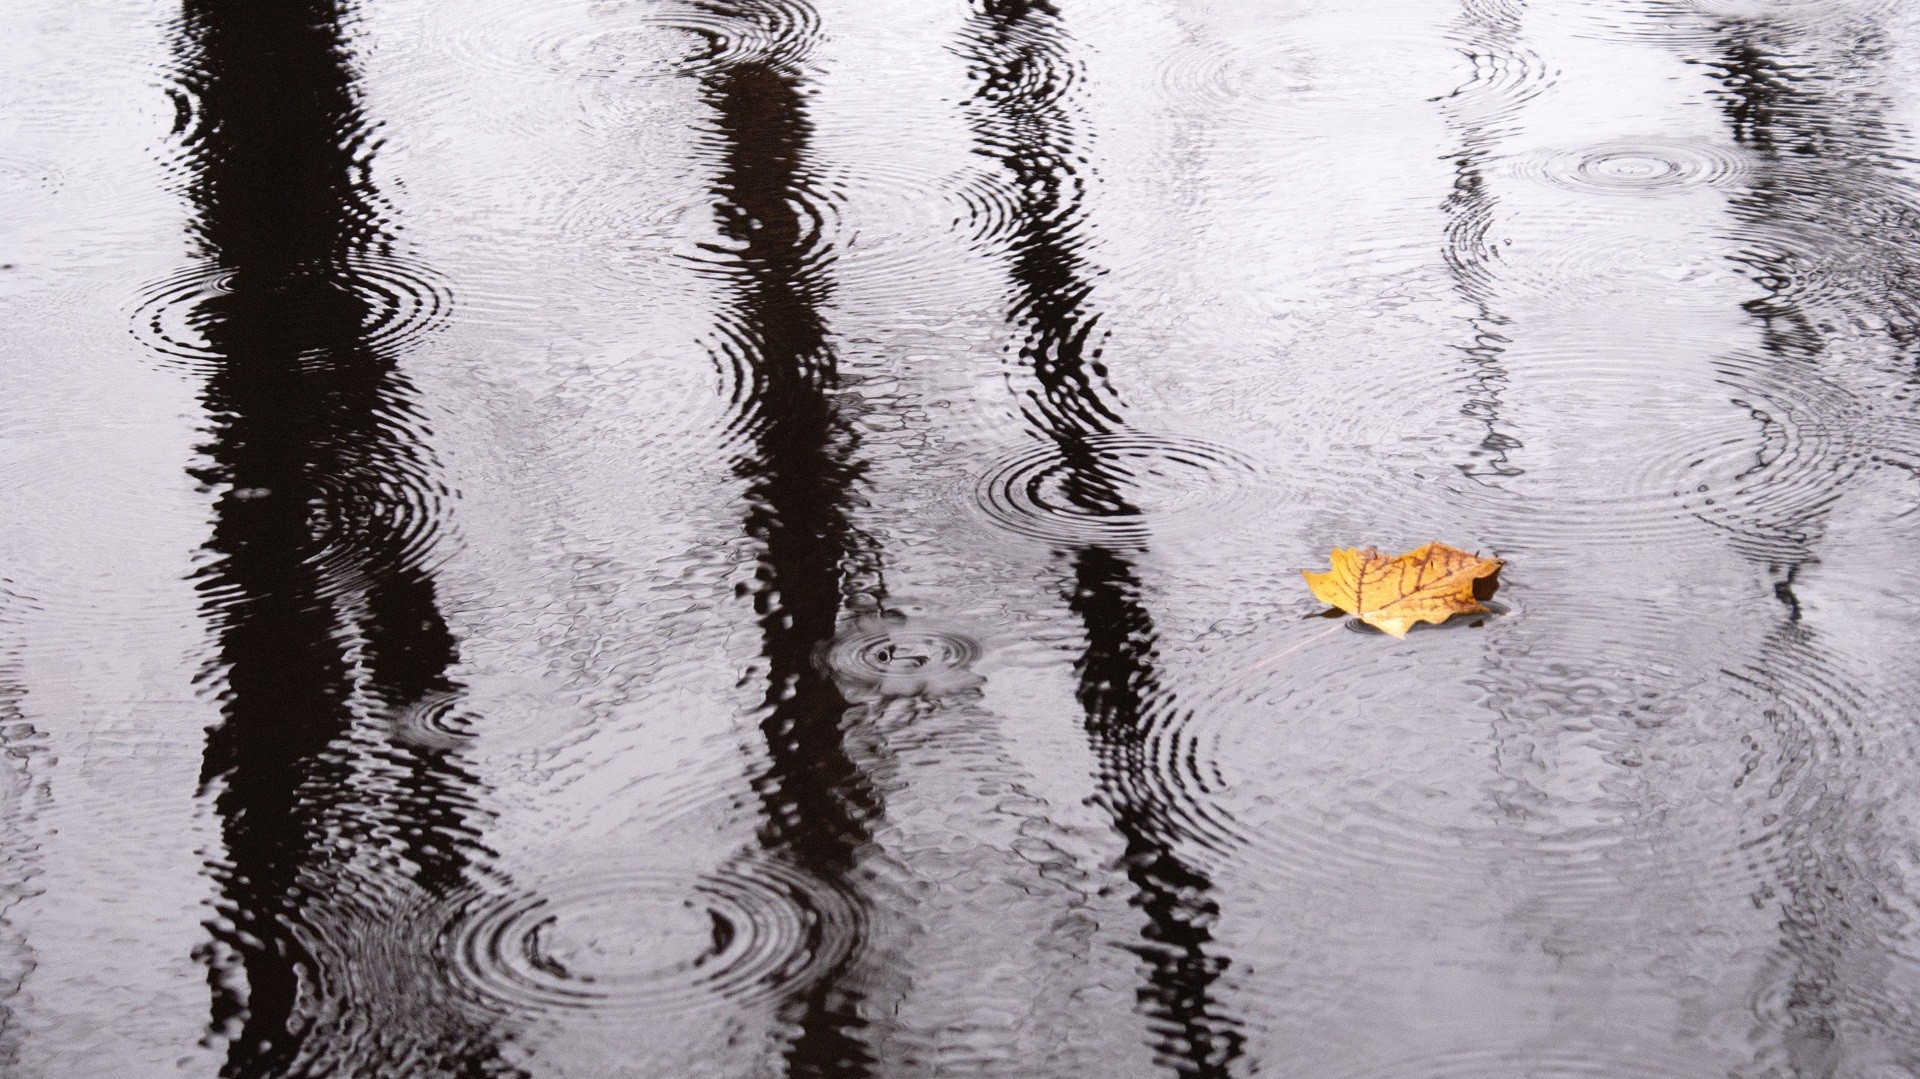 General 1920x1079 ripples reflection leaves water rain fallen leaves outdoors nature